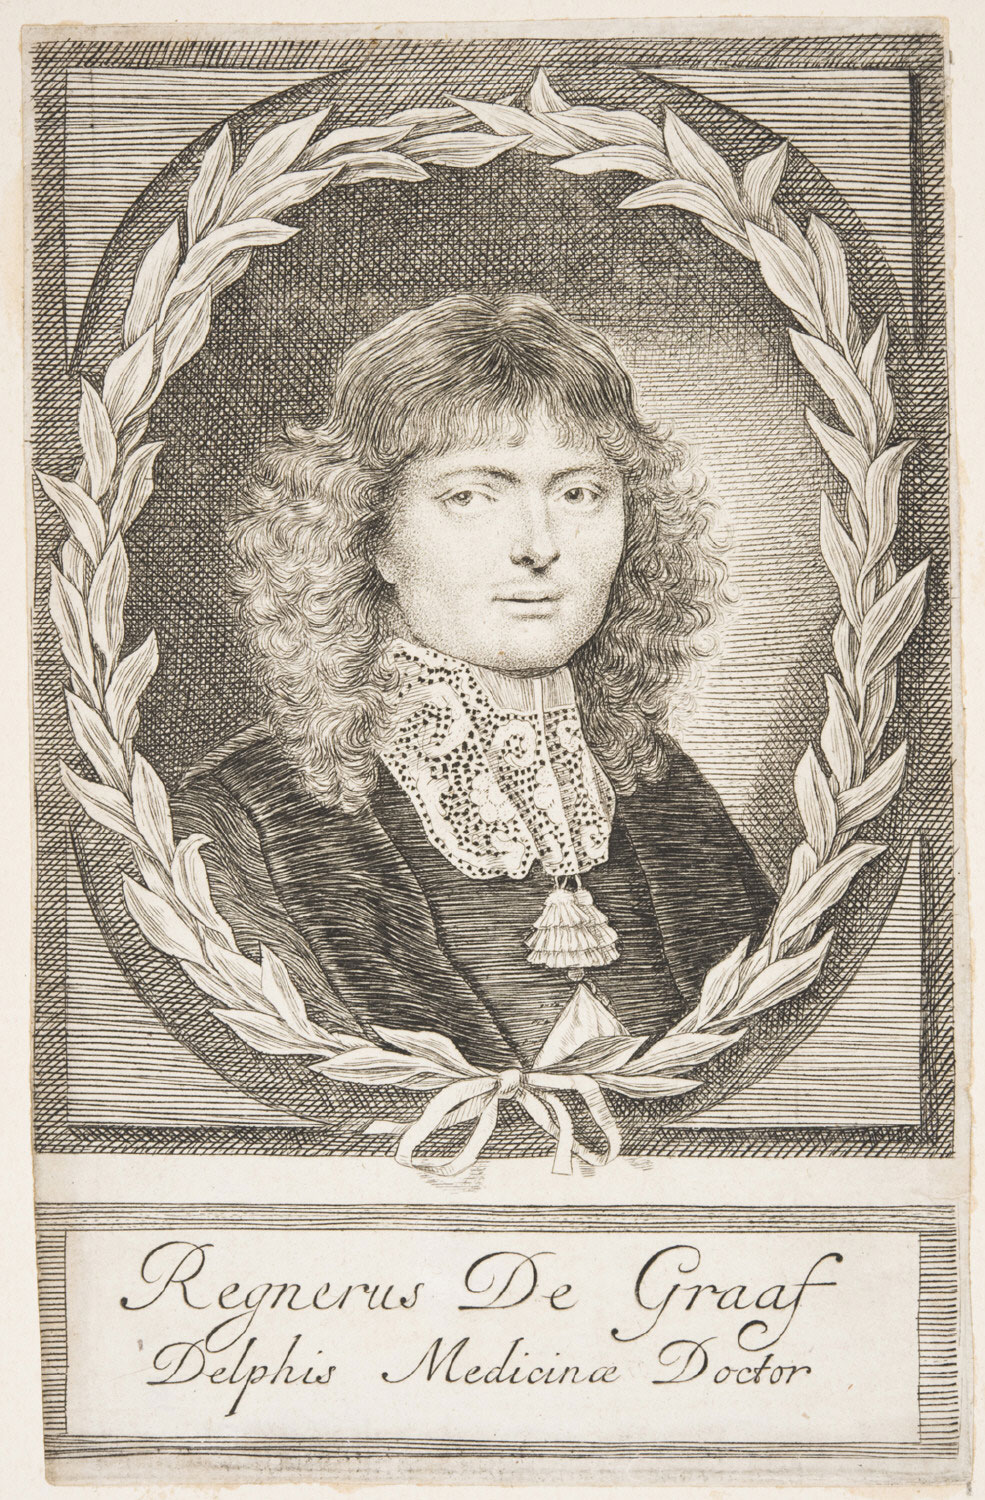 A printed bust-length portrait of a man in an oval, surrounded with a laurel. He is wearing seventeenth-century clothes and wears his curly hair loose to his shoulders. He looks out with a direct, neutral expression. Below him there is an inscription that identifies him.